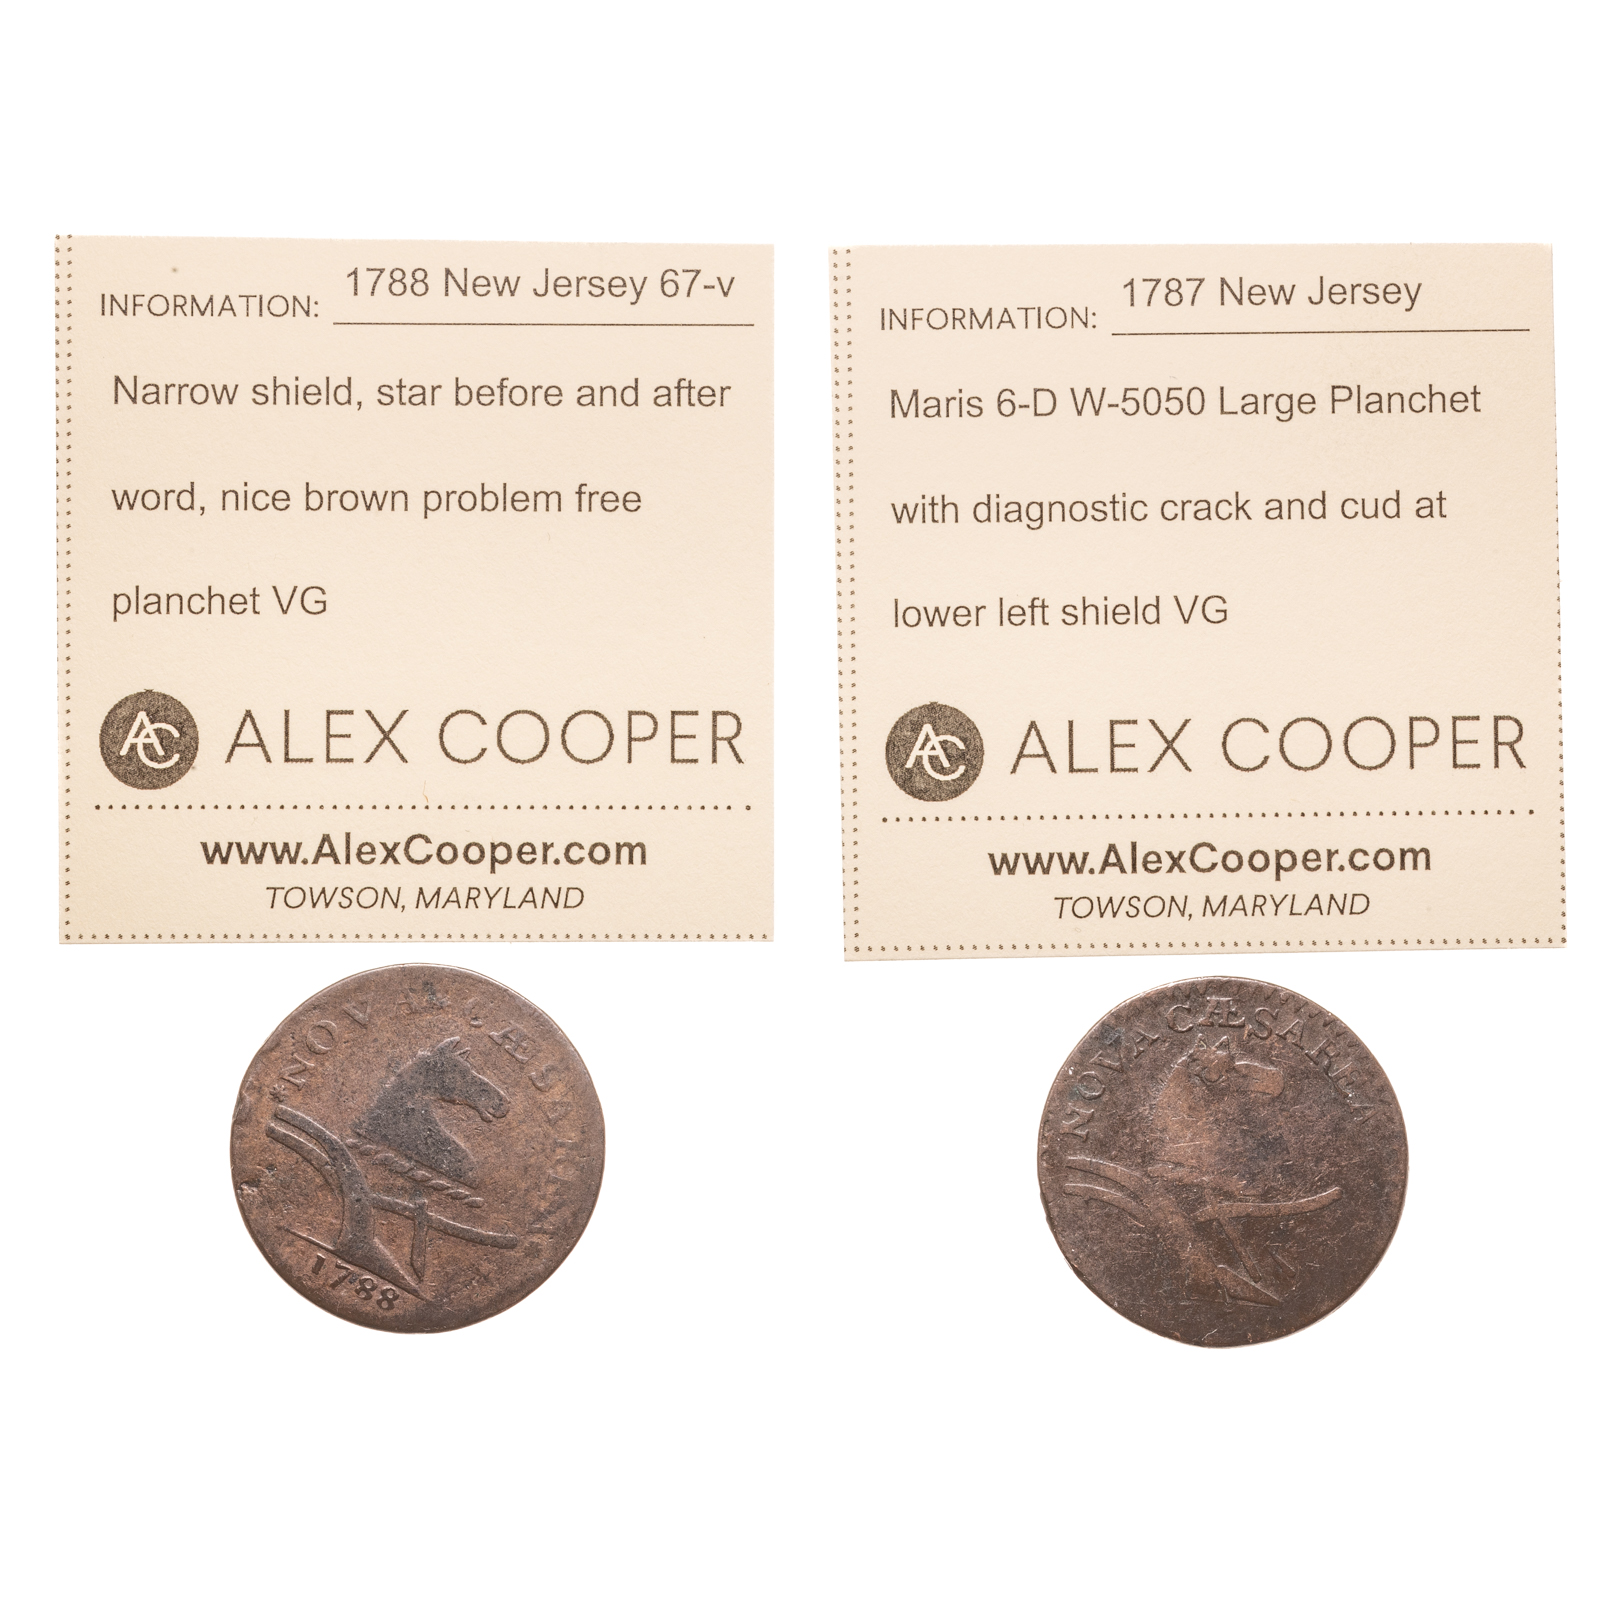 TWO NEW JERSEY COPPERS 1787 6 D 2ea050